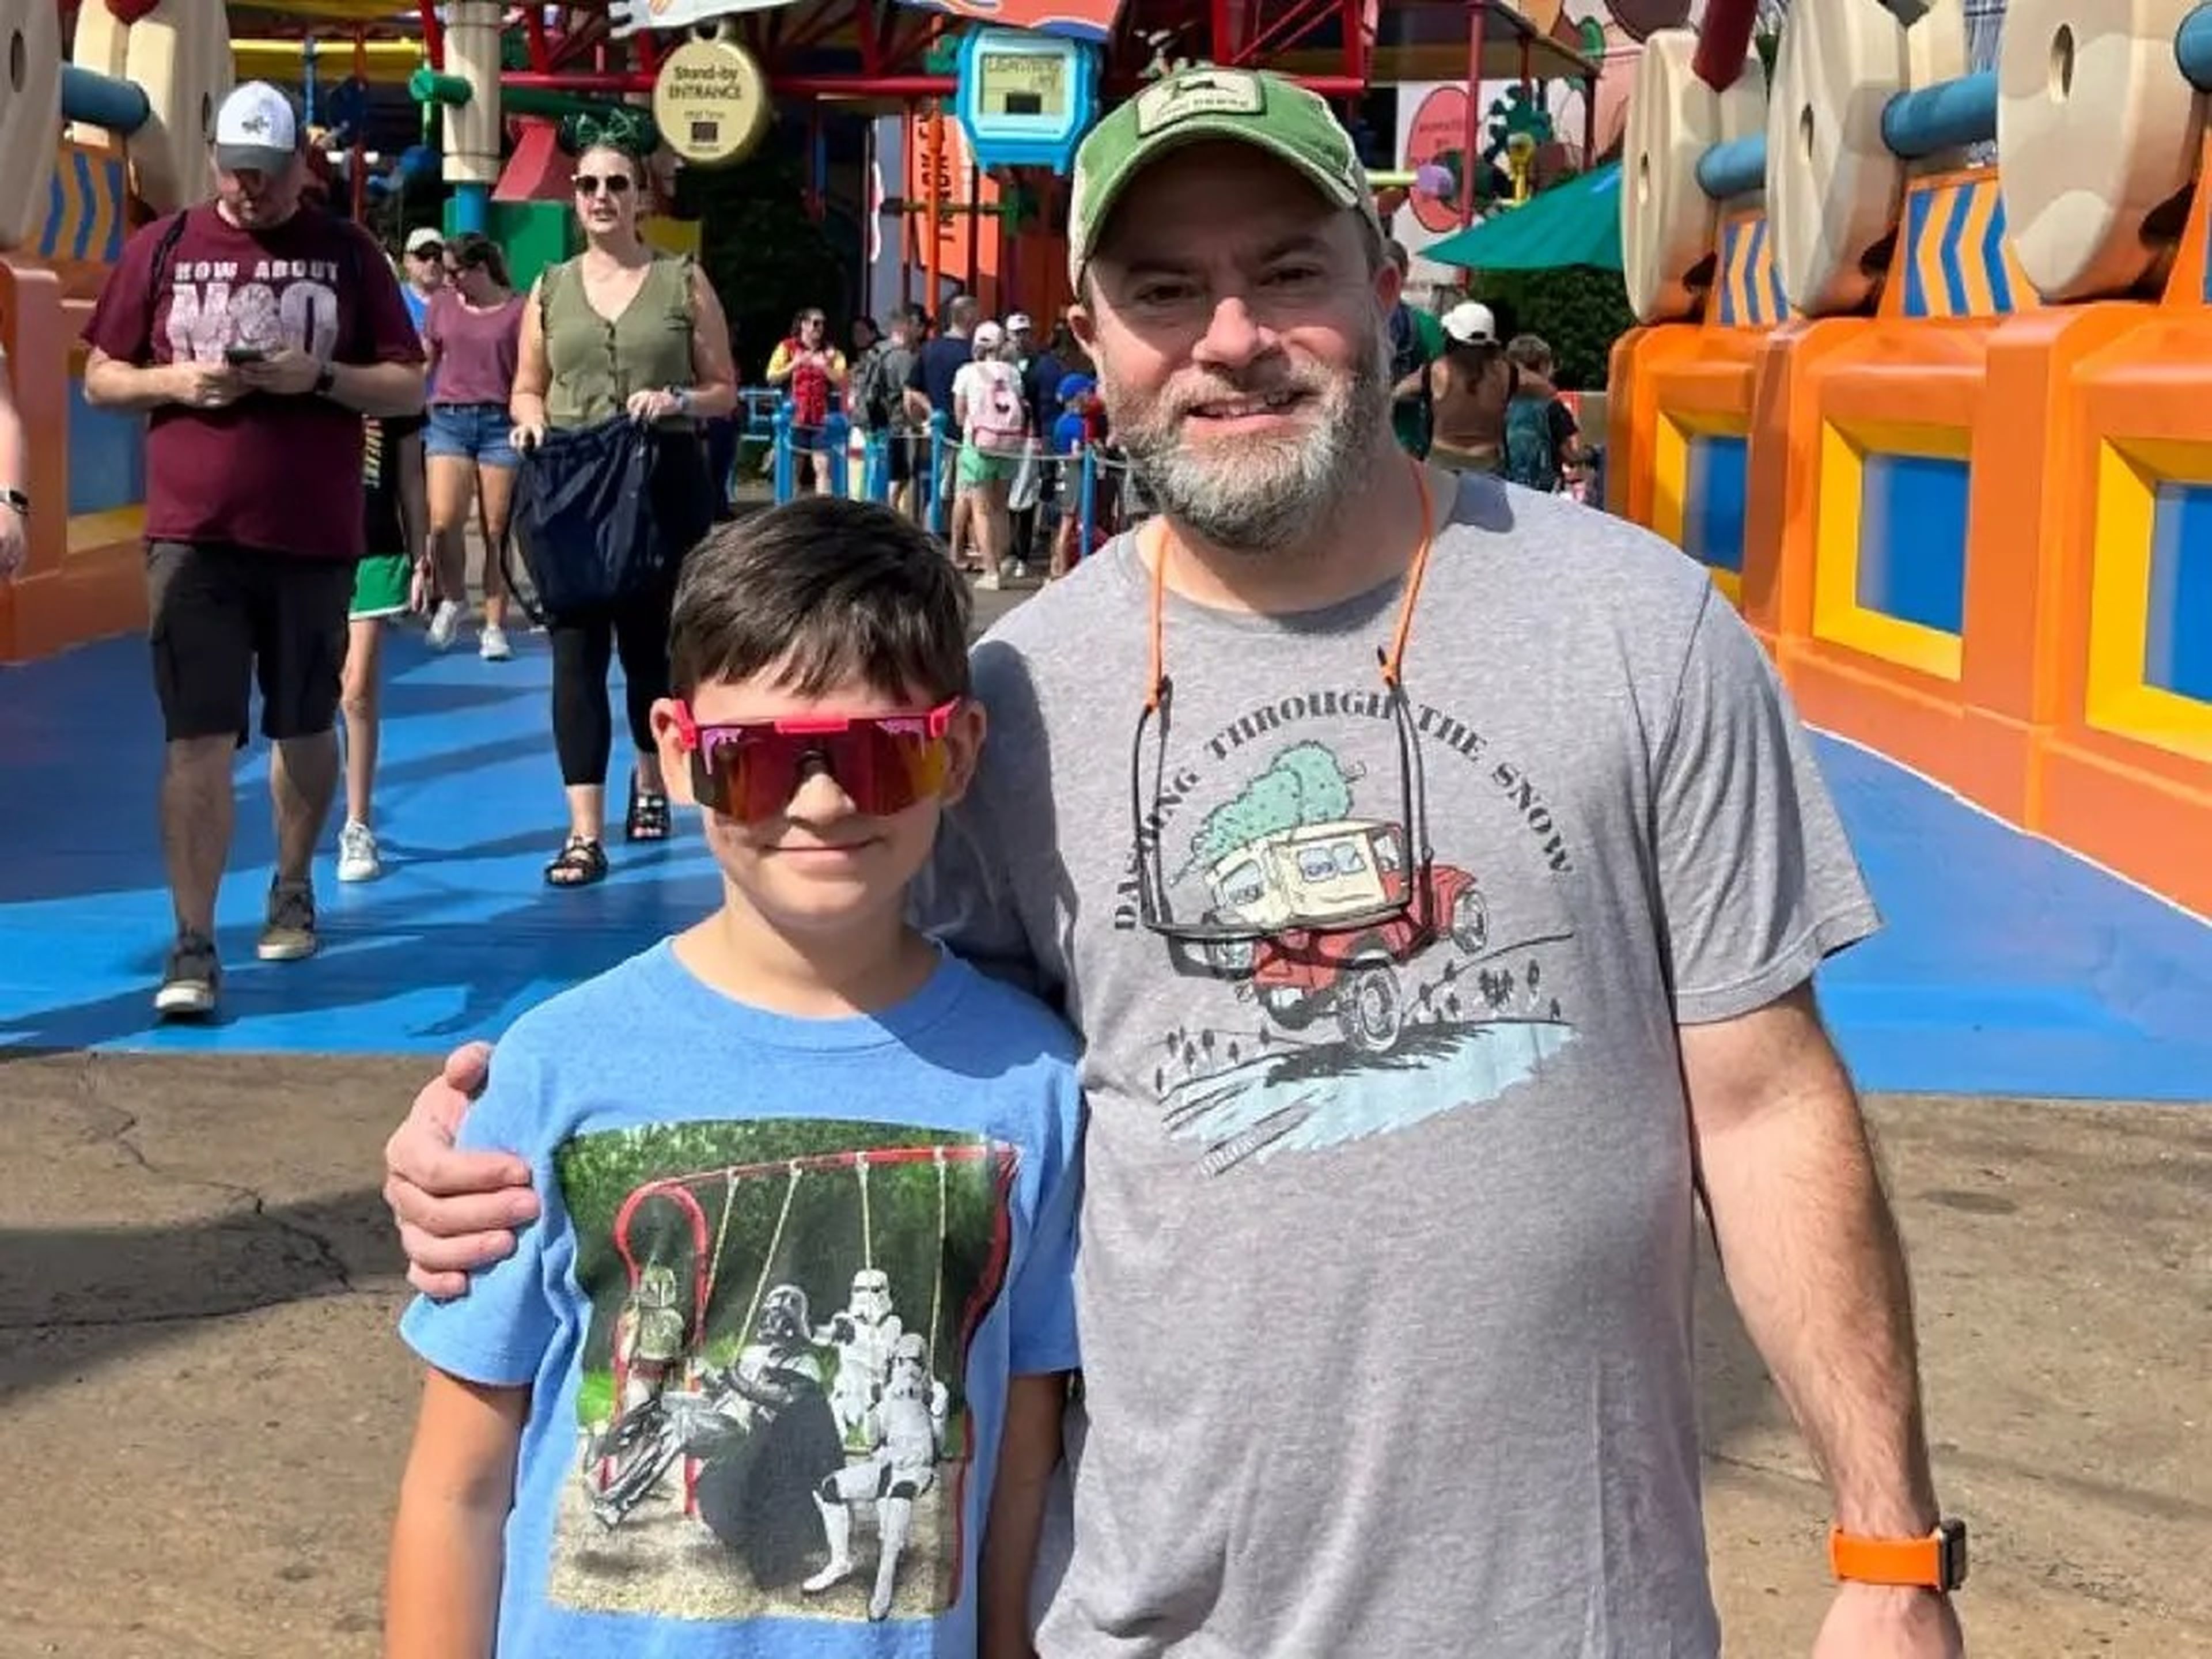 Author Matt Cabral and his son at Disney World in front of Slinky Dog Dash